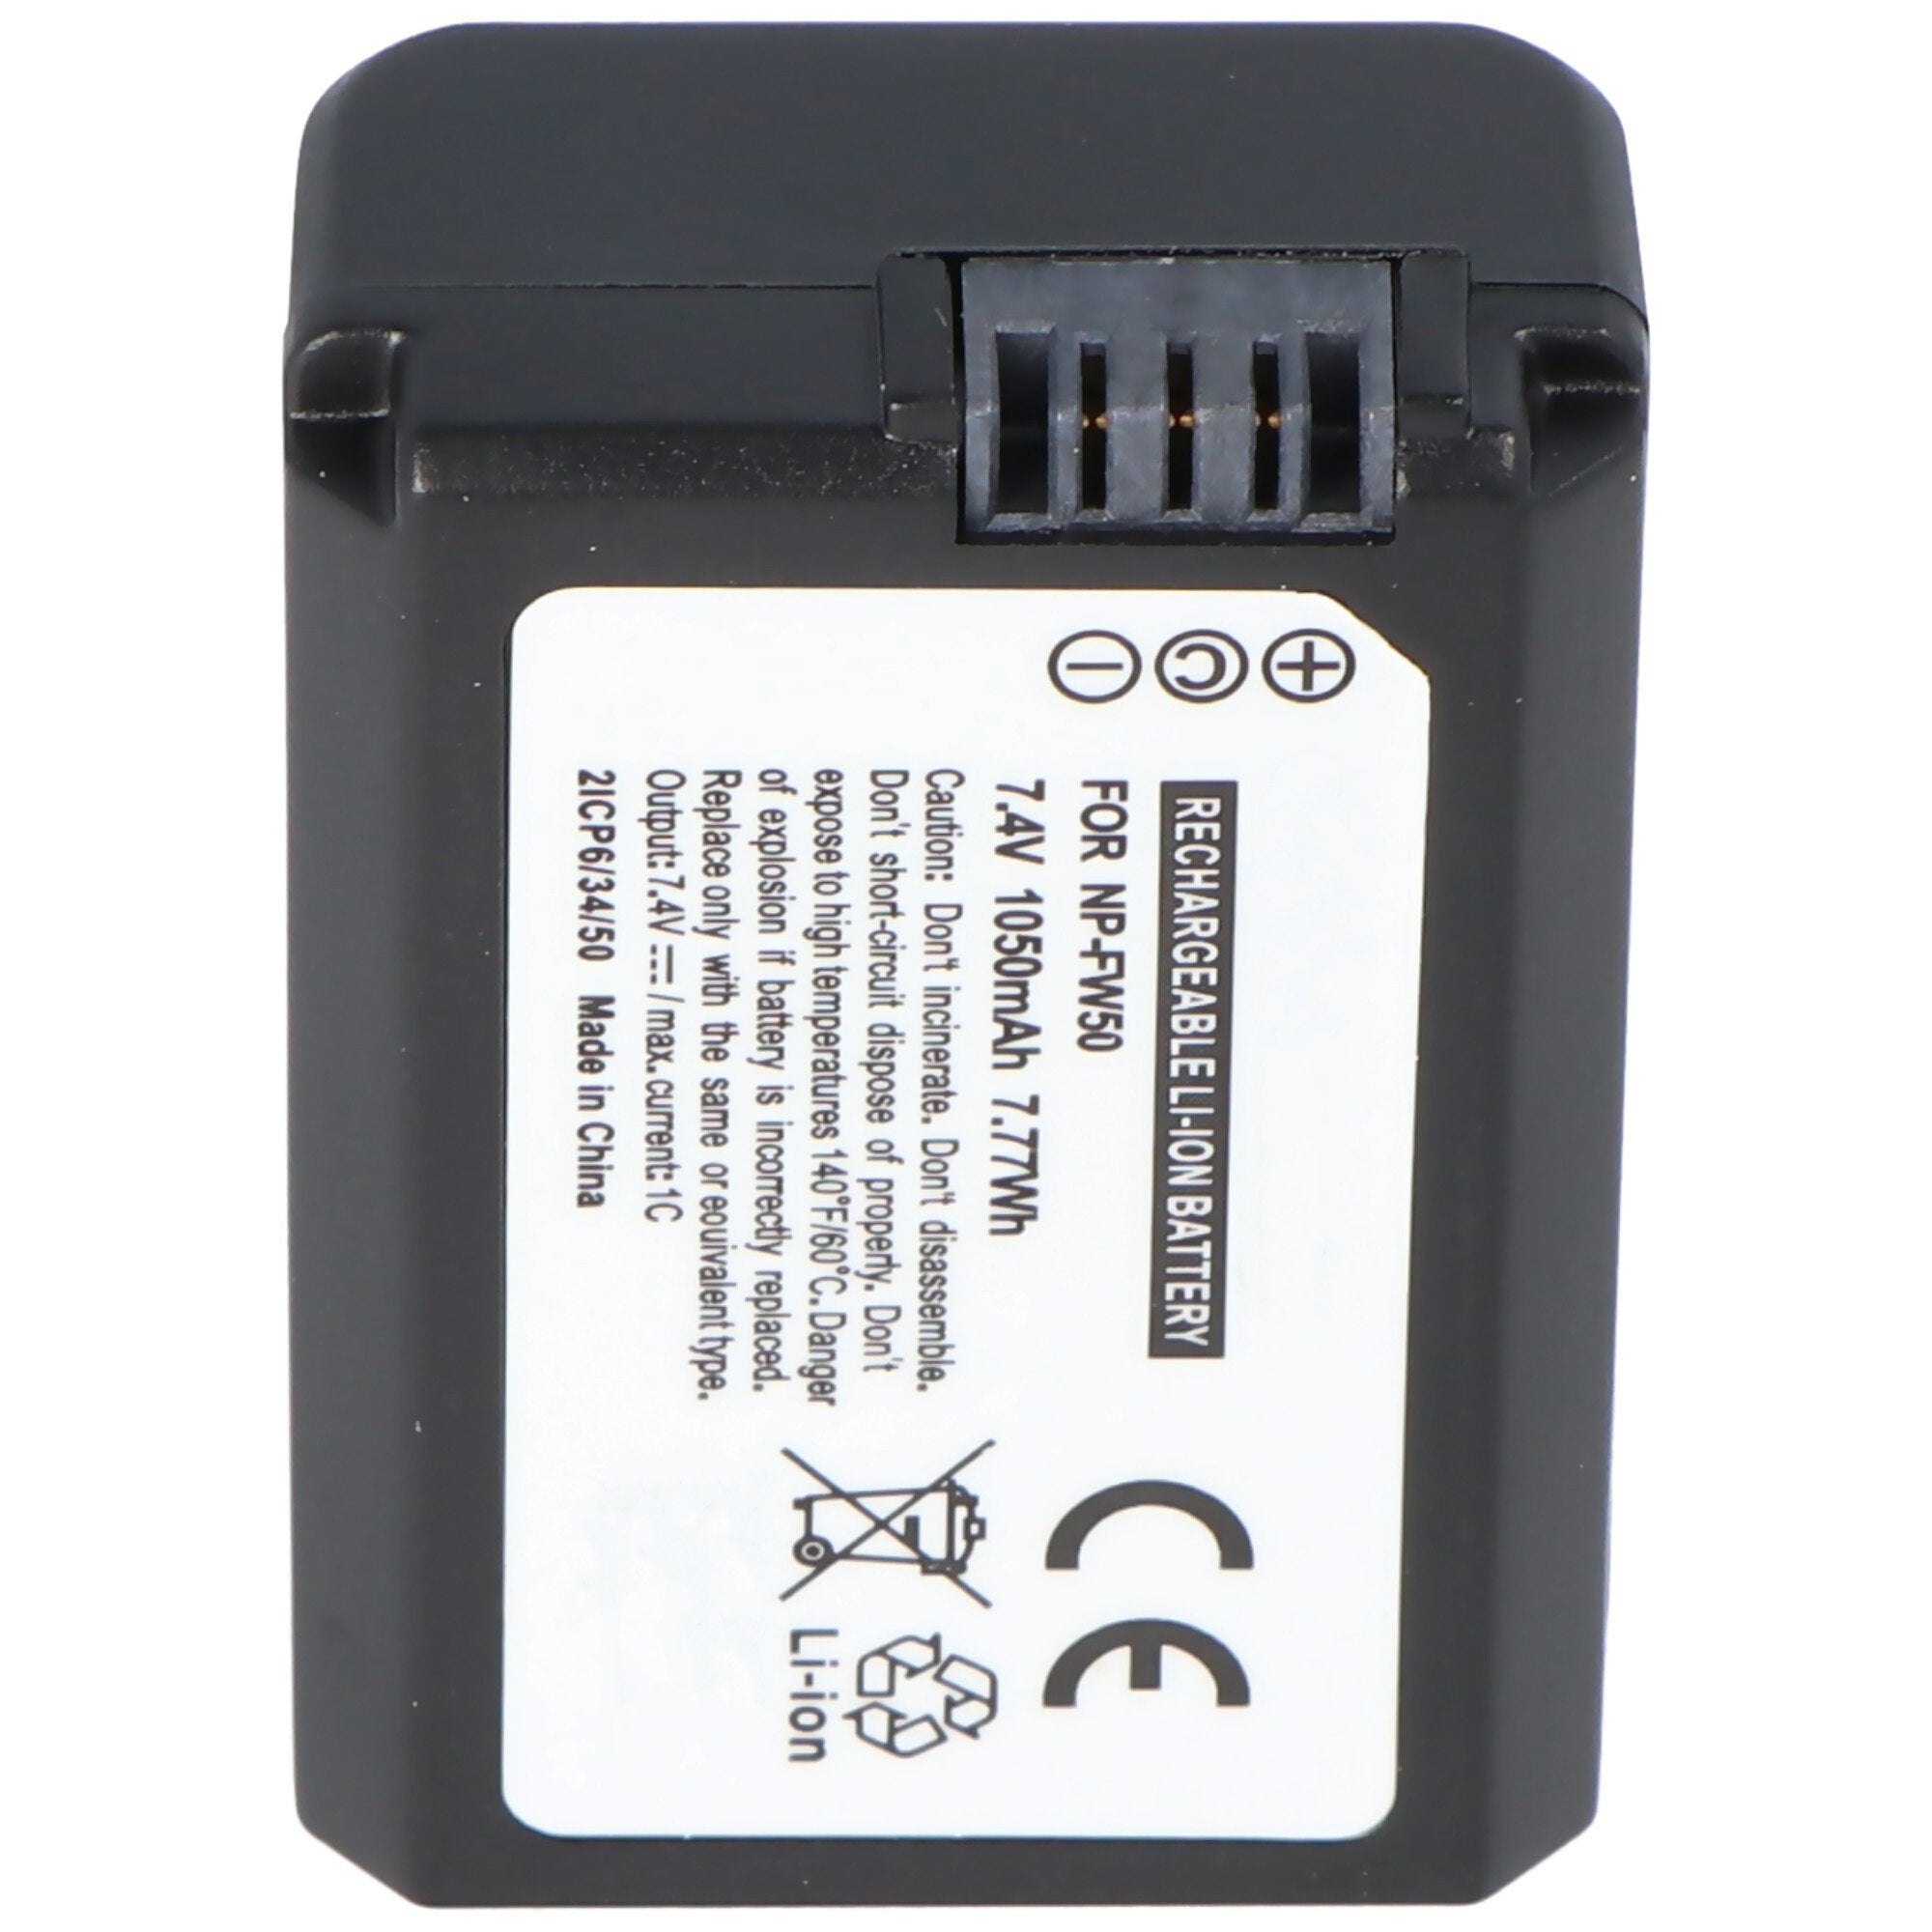 AccuCell battery suitable for Sony NP-FW50 battery NEX-3, NEX-5, Alpha 55